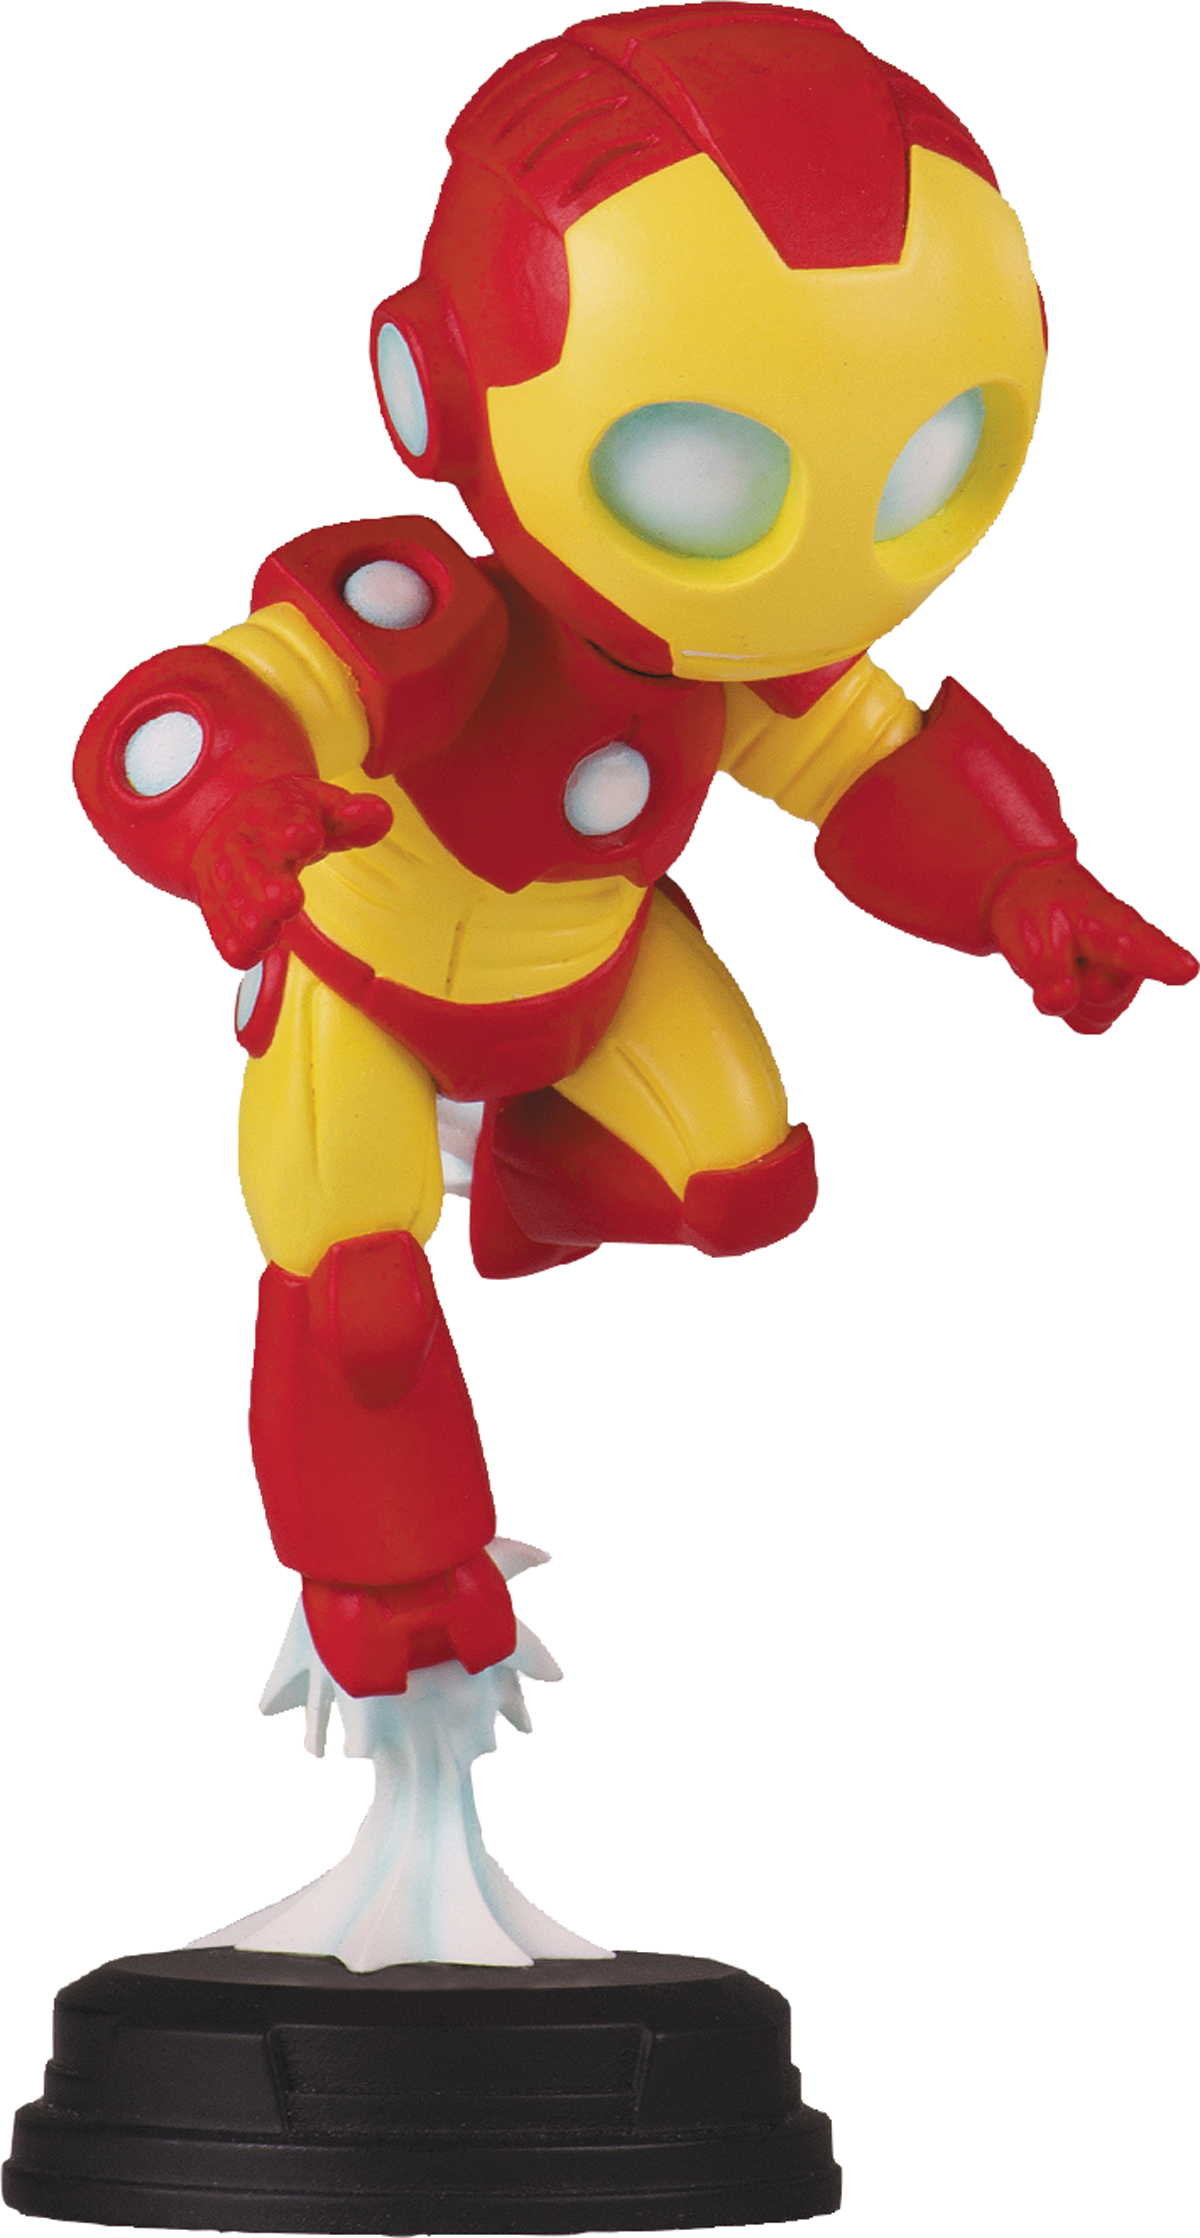 Iron Man Animated Statue Gentle Giant Studios for sale online 